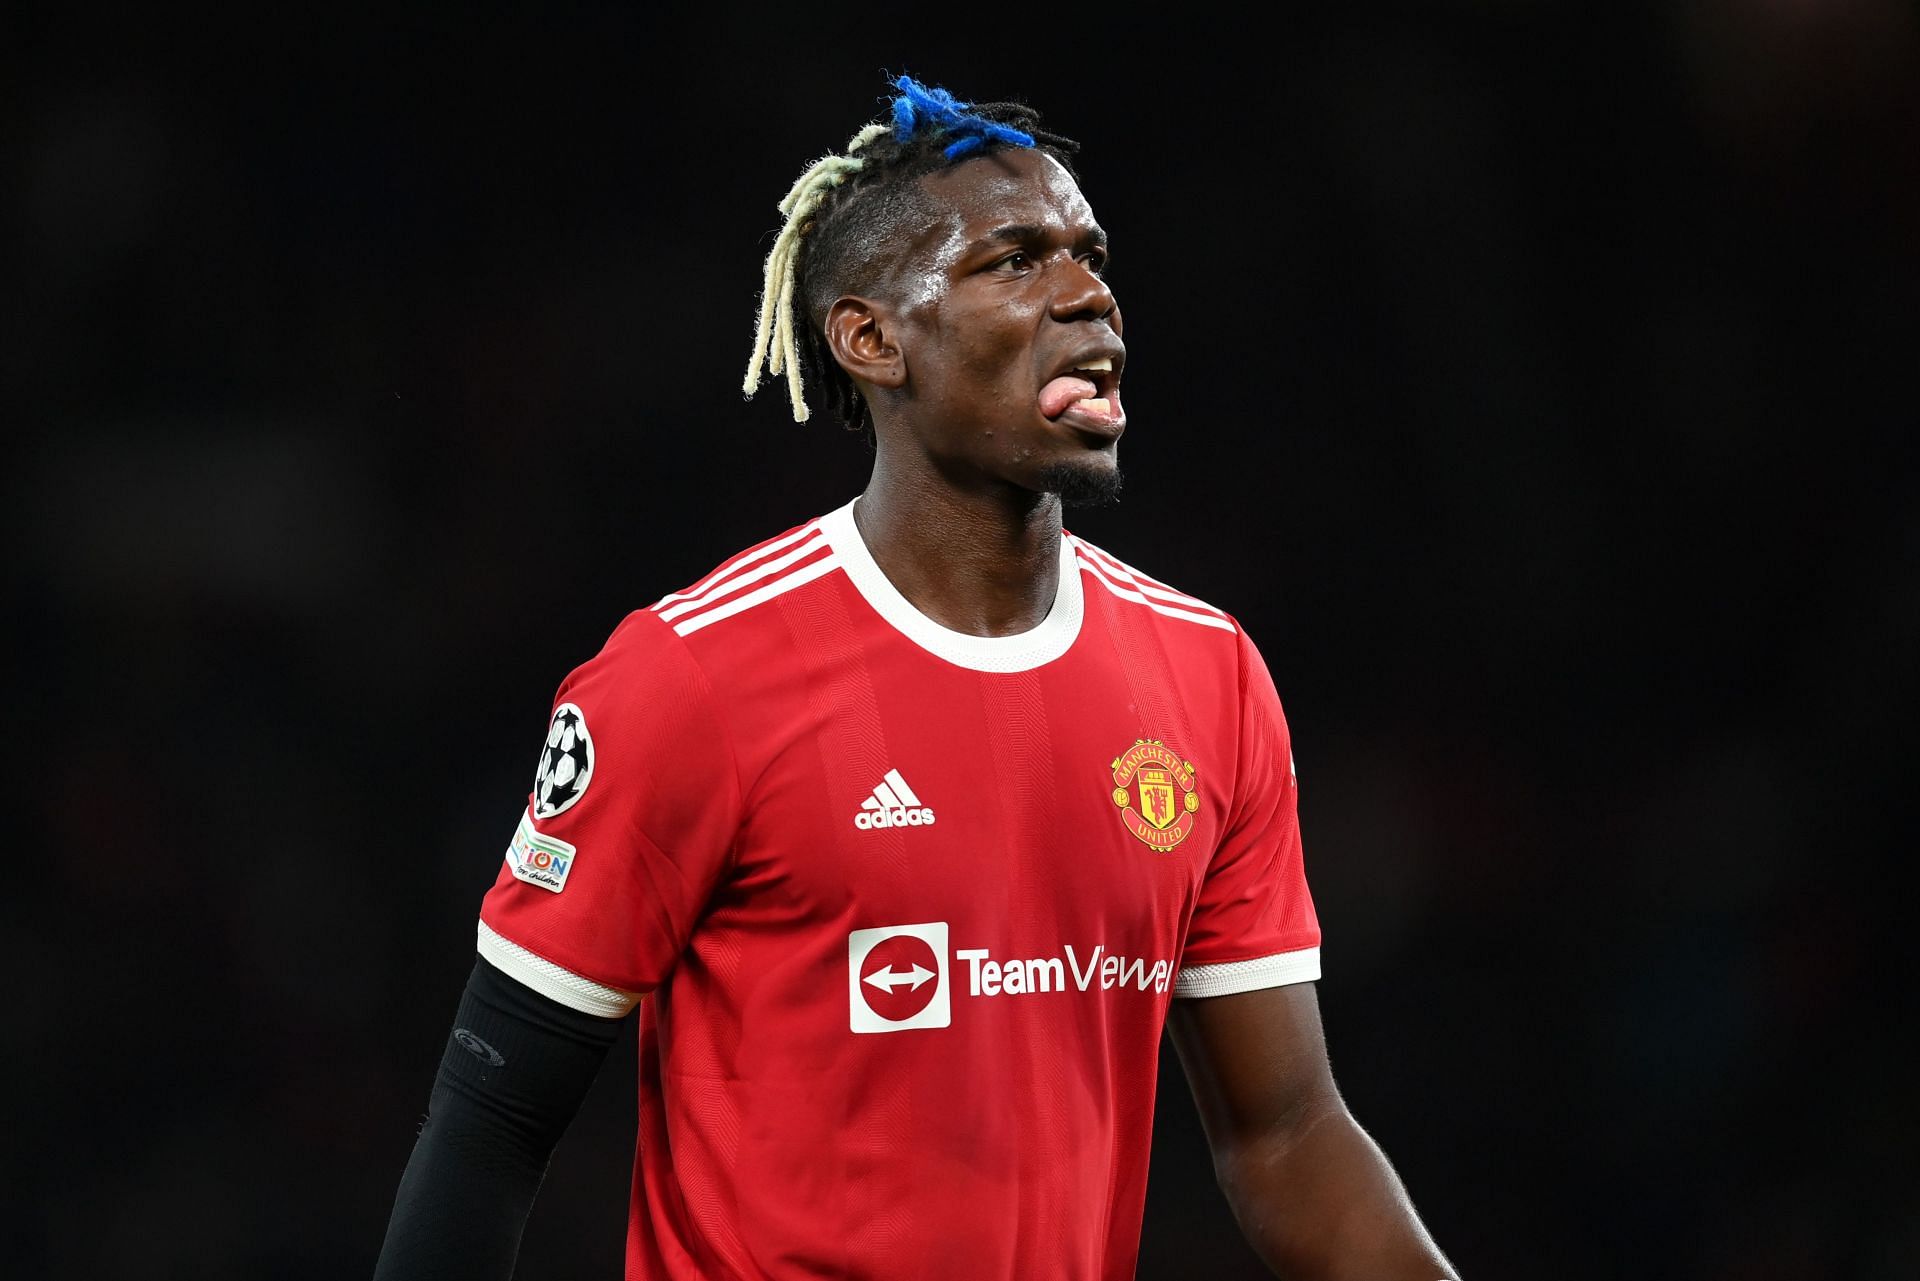 5 Reasons Why Manchester United Should Let Paul Pogba Leave The Club